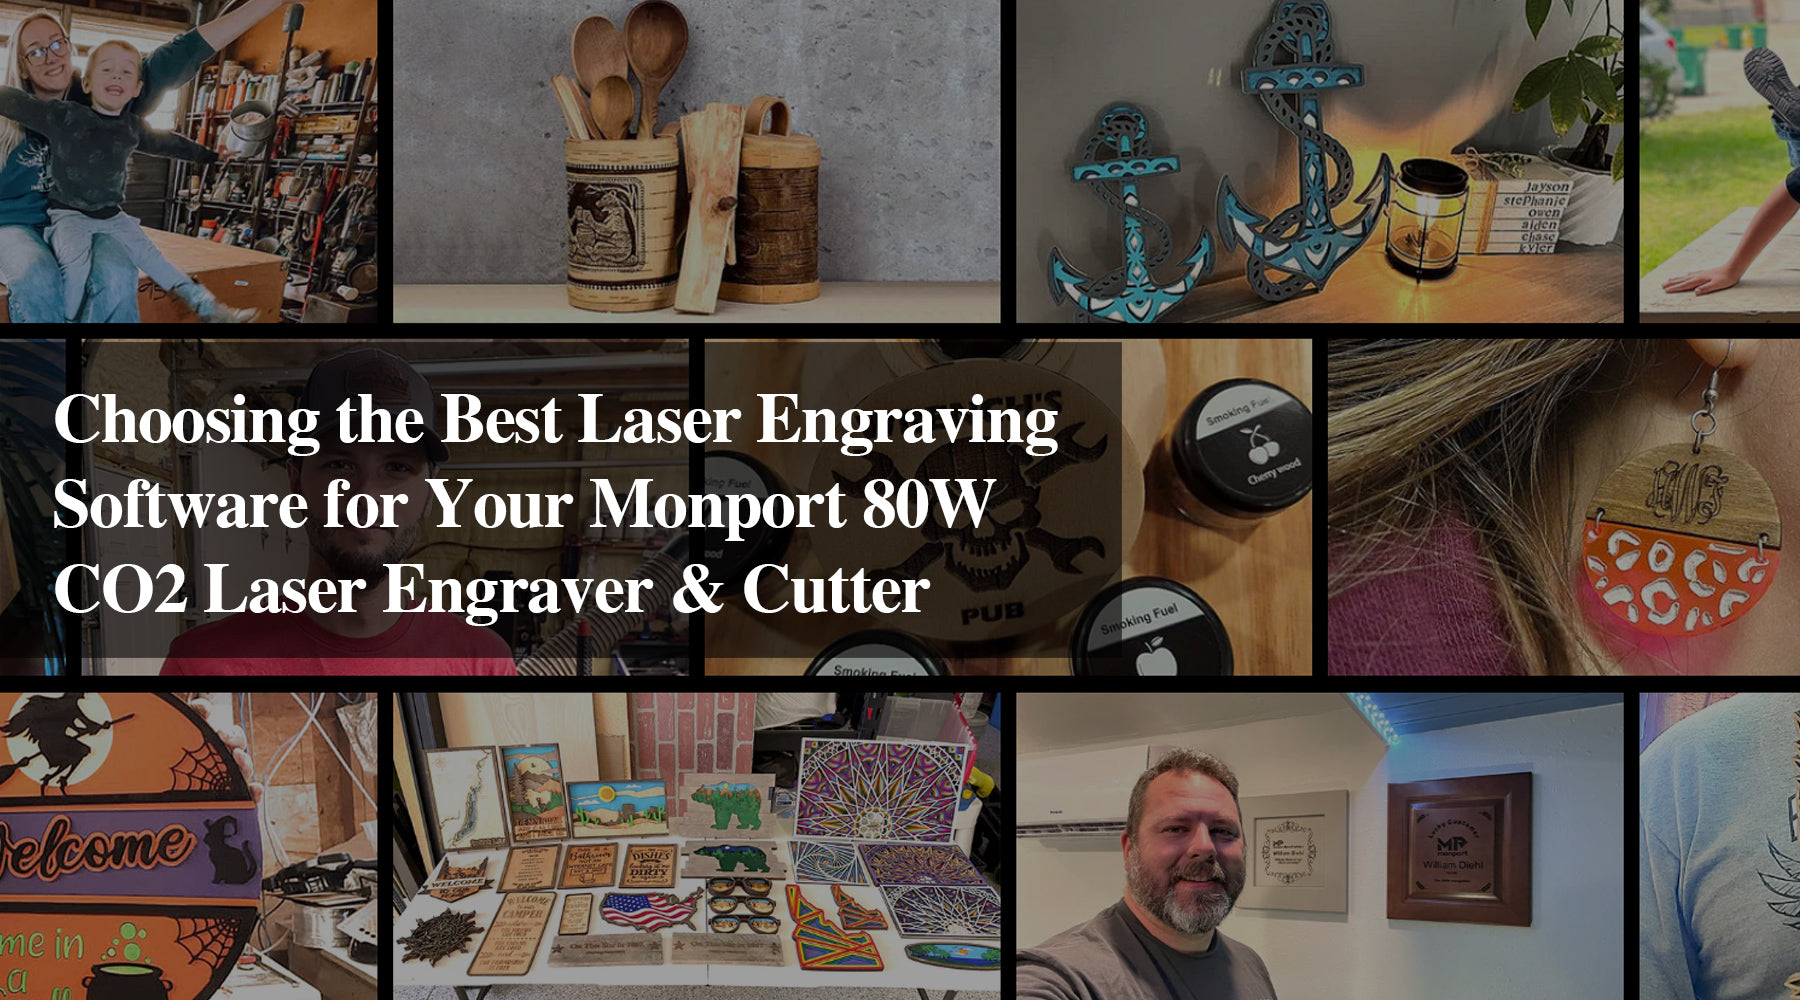 Choosing the Best Laser Engraving Software for Your Monport 80W CO2 Laser Engraver & Cutter